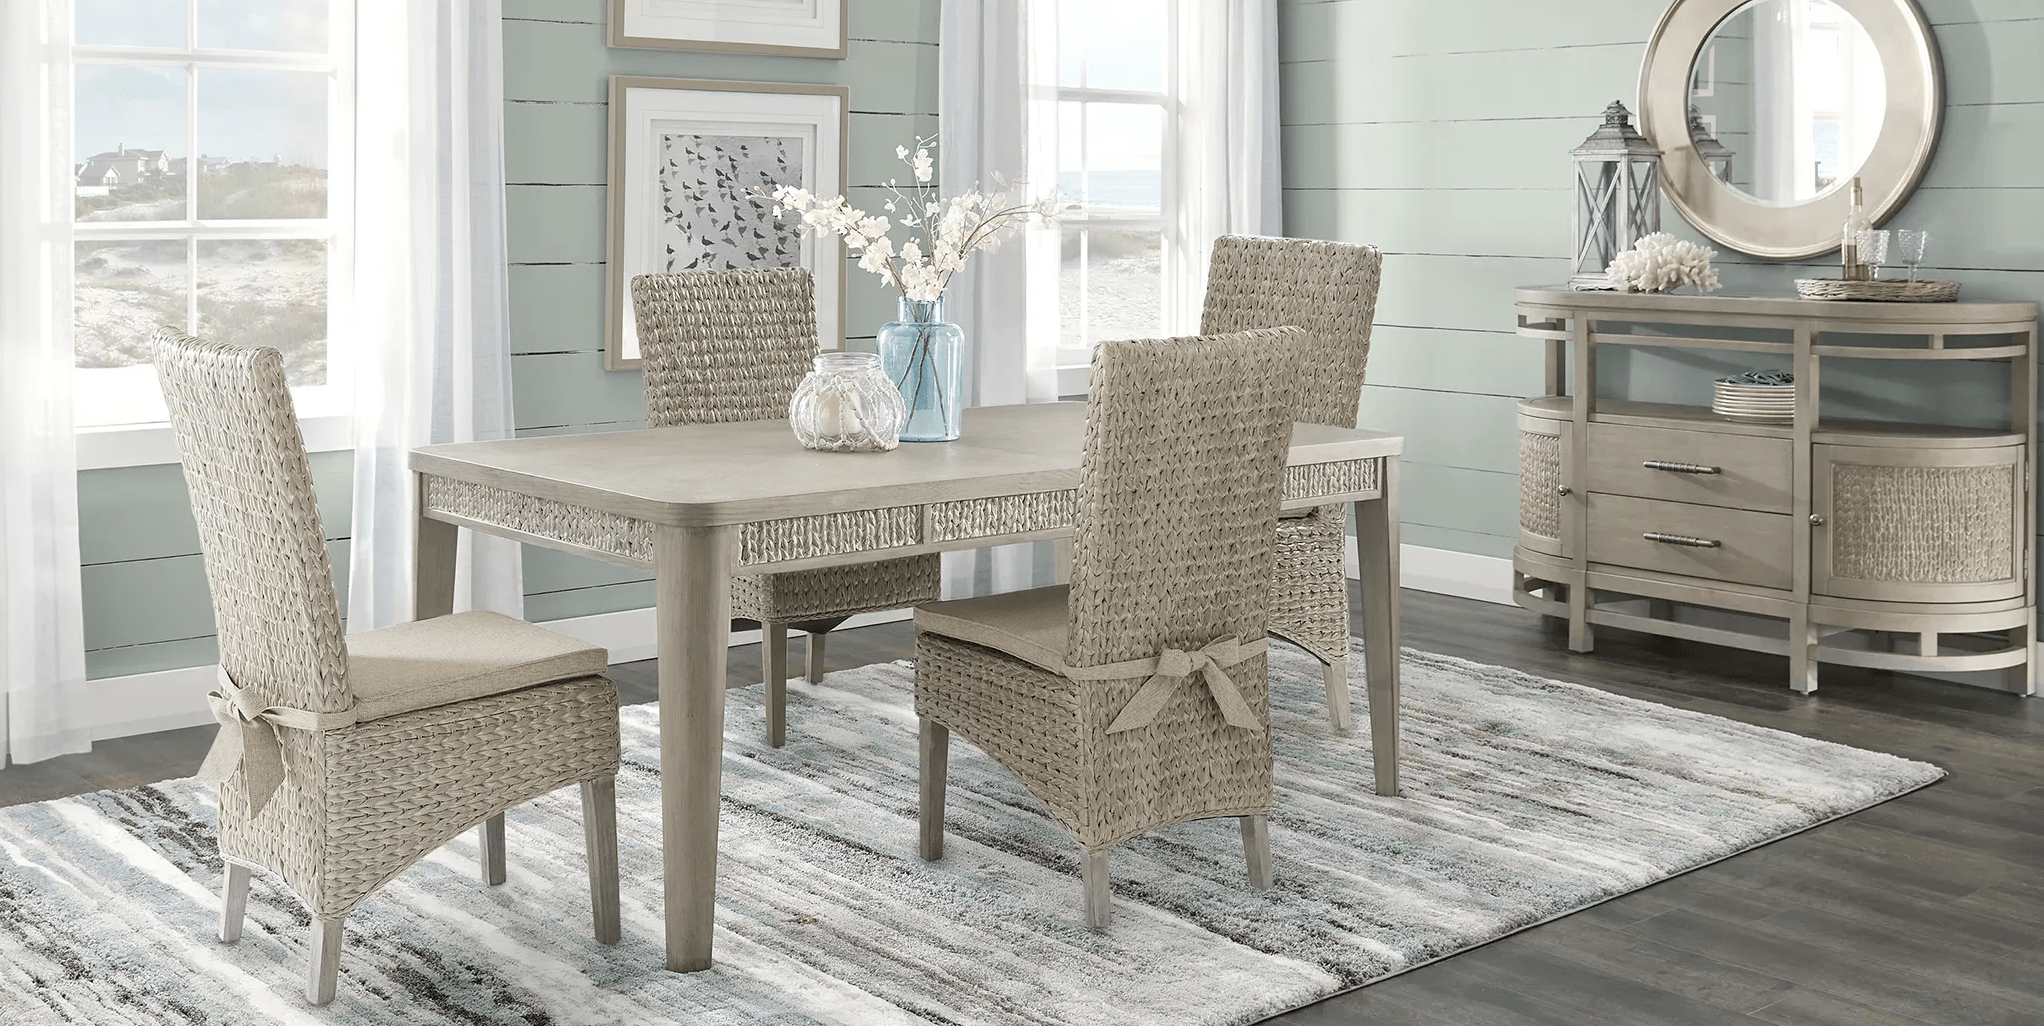 segrass dining room chairs table carpet in costal room